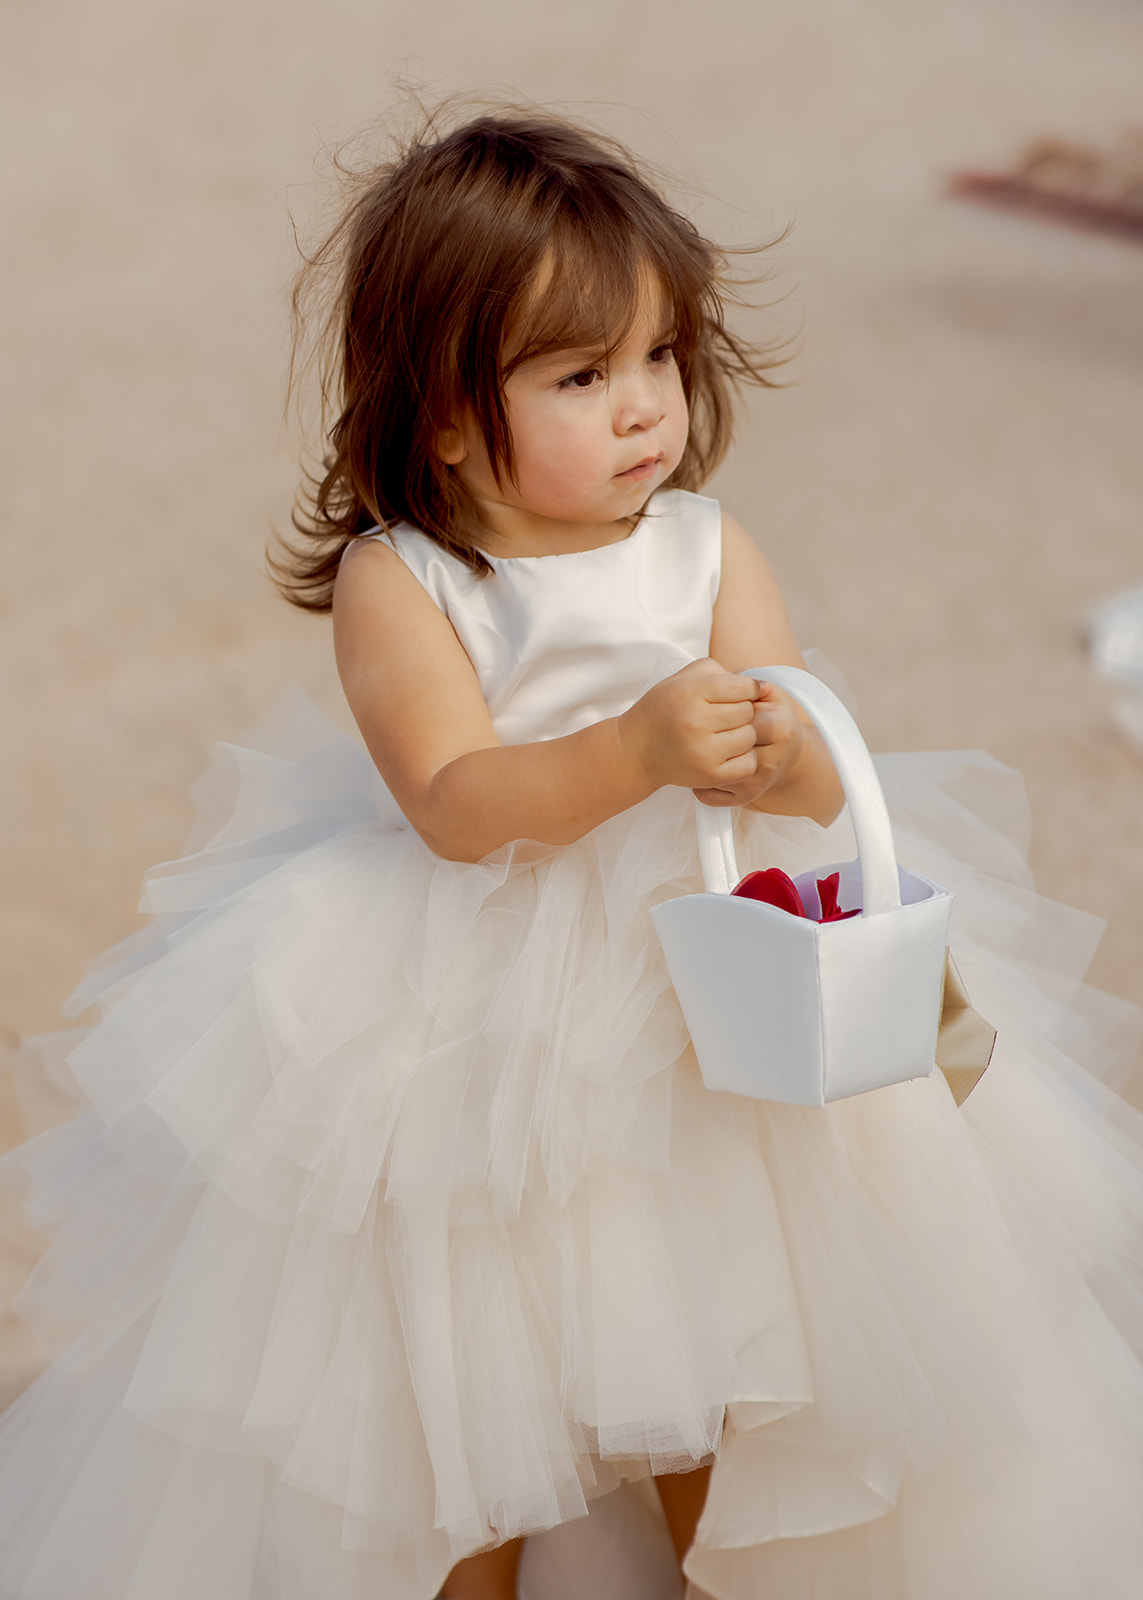 Flower Girl Holding Basket with Red Petals 